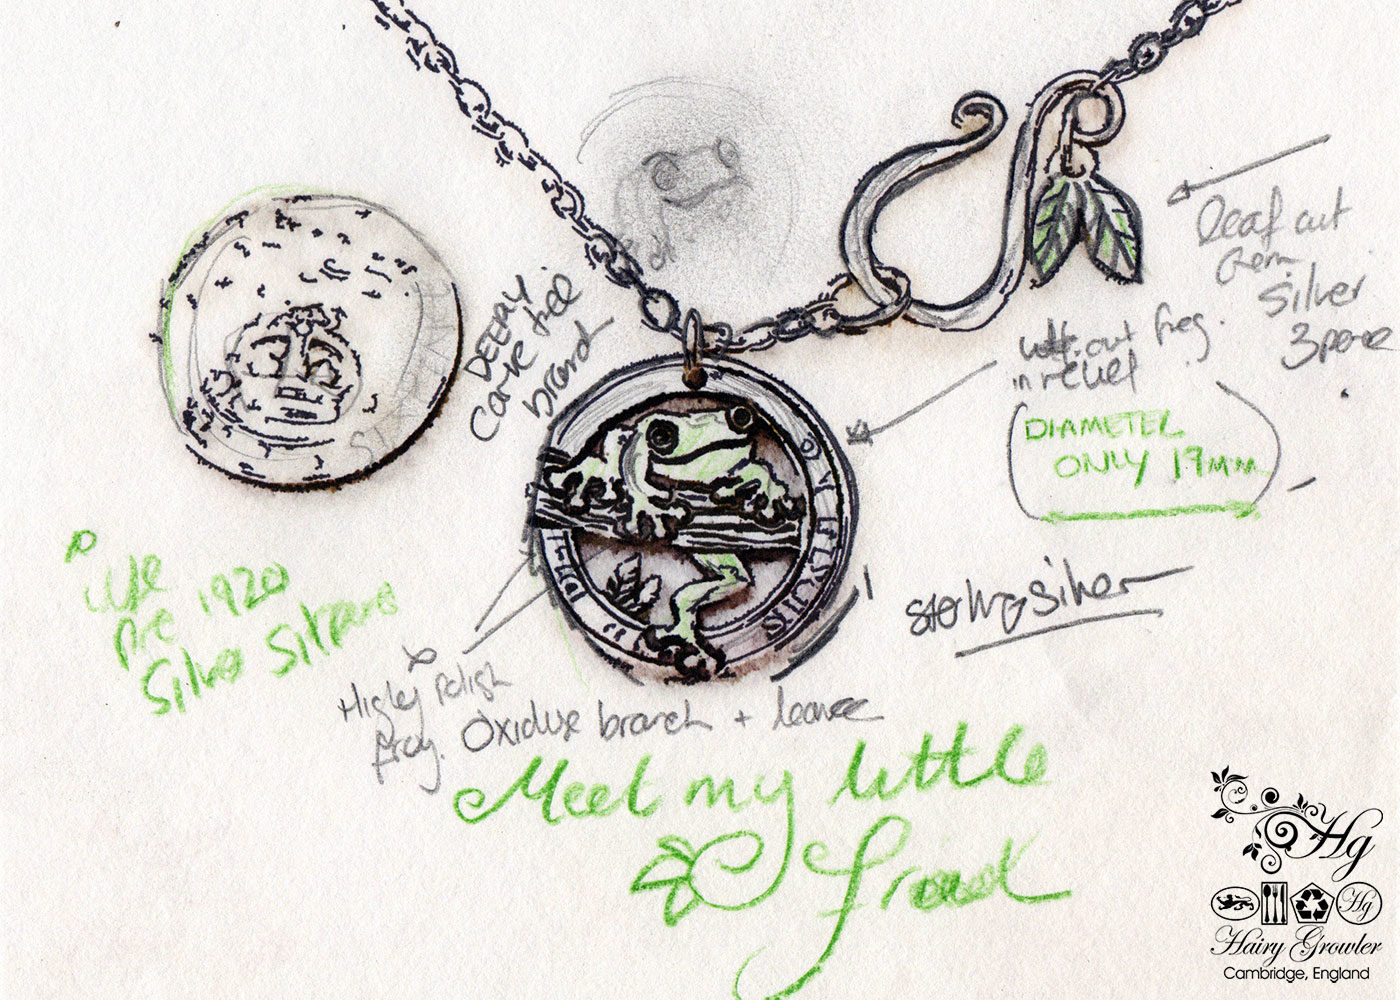 Hand crafted and repurposed silver sixpence coin frog pendant necklace